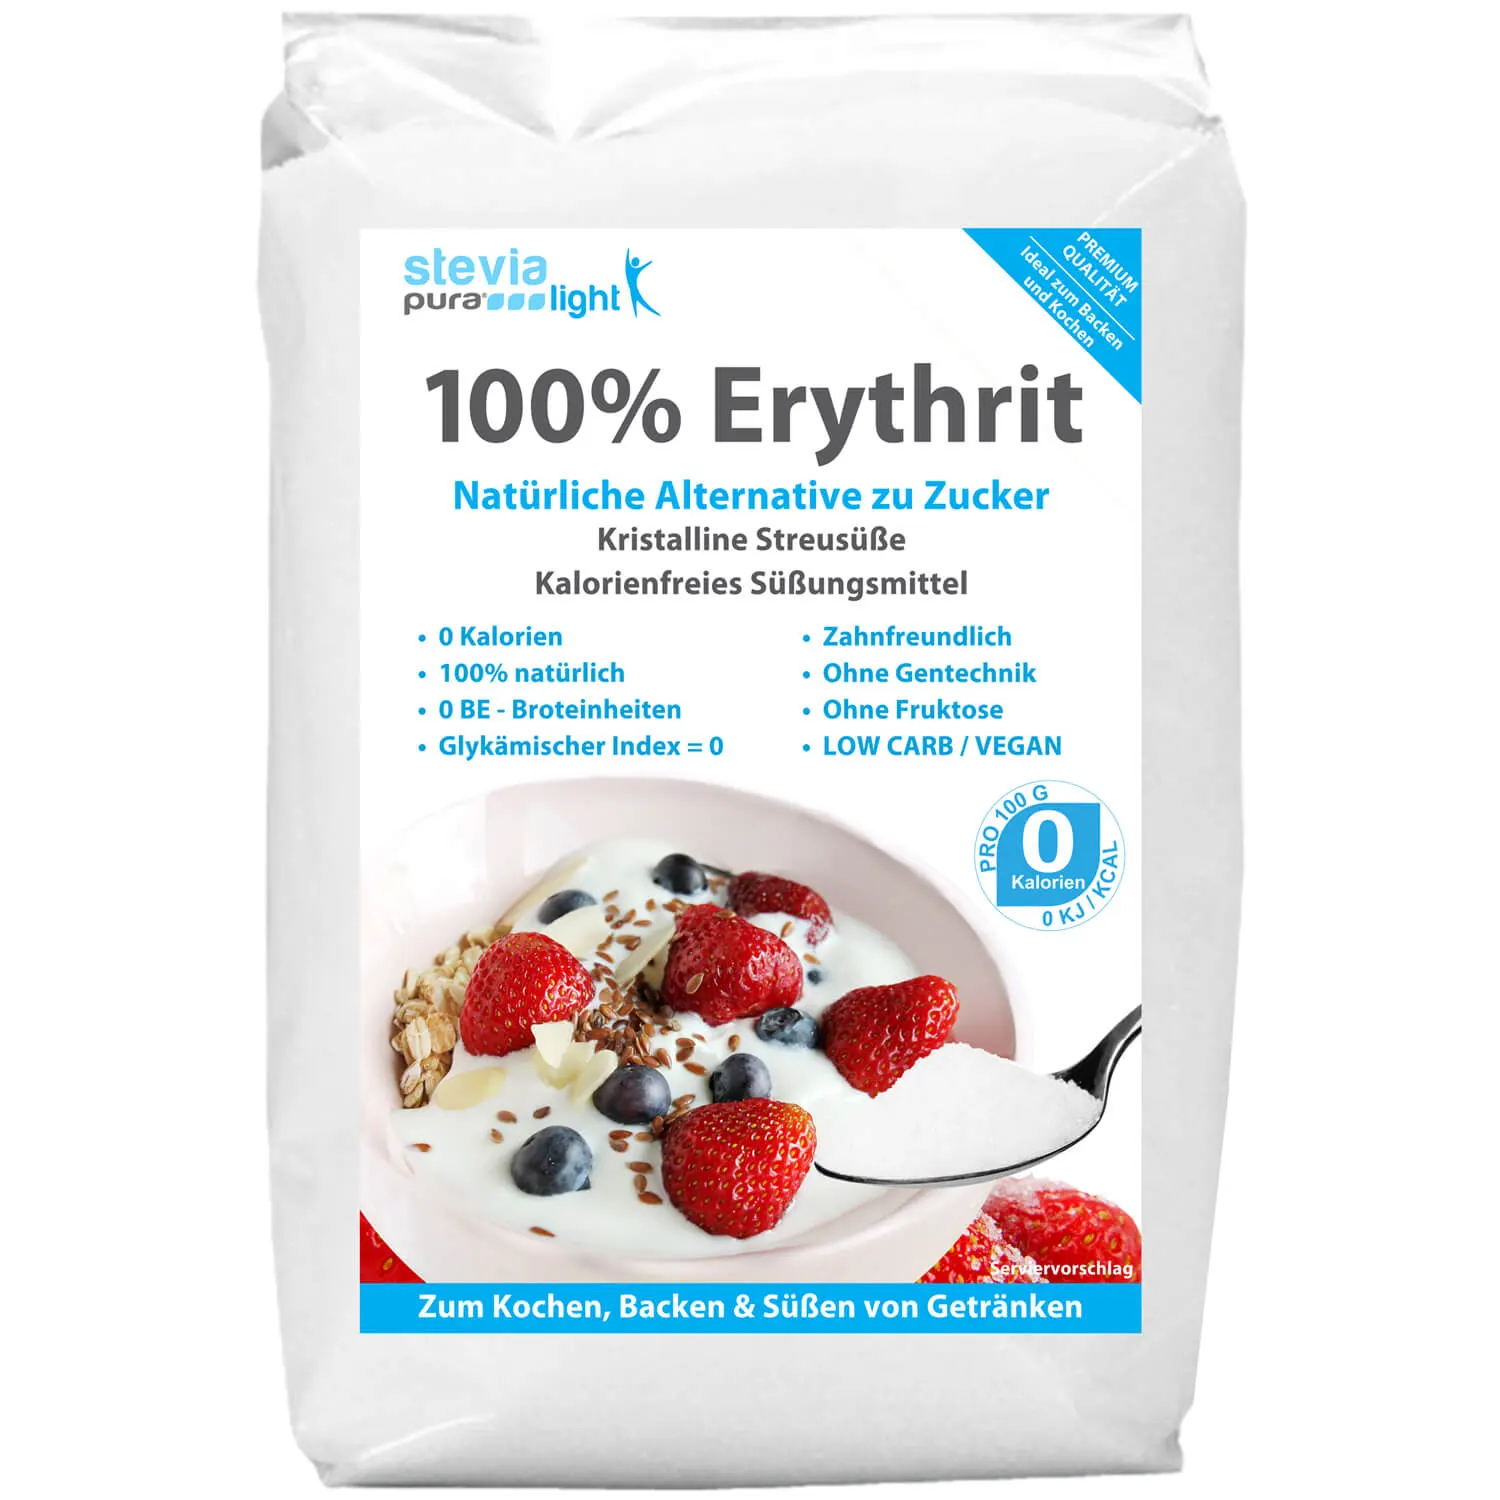 Buy Erythritol: The sugar substitute is also called Erythritol.